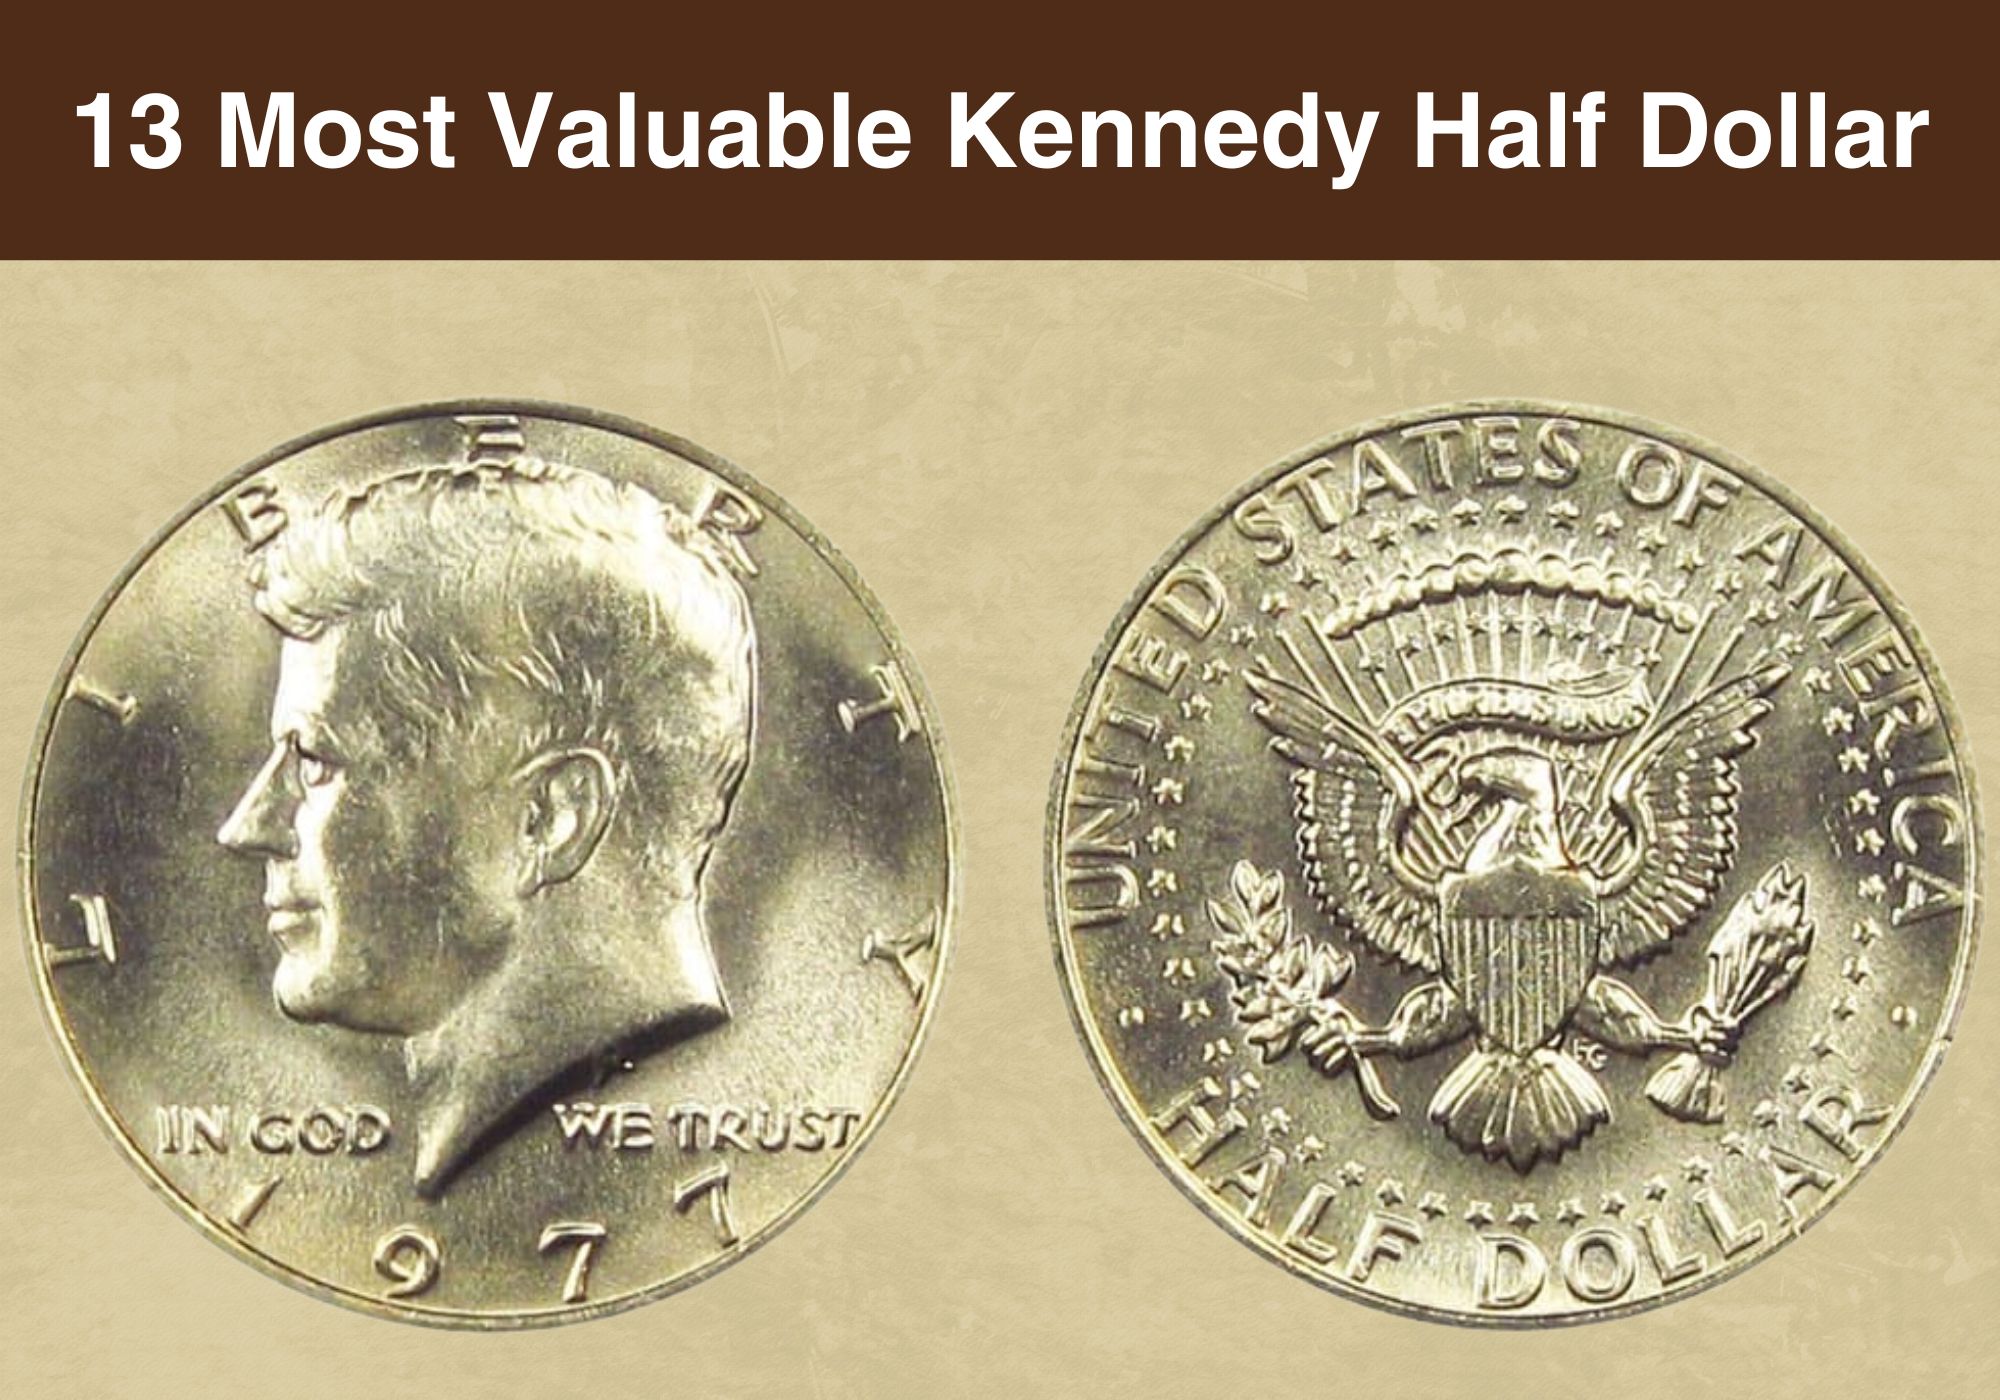 13 Most Valuable Kennedy Half Dollar Coins Worth Money (With Pictures)